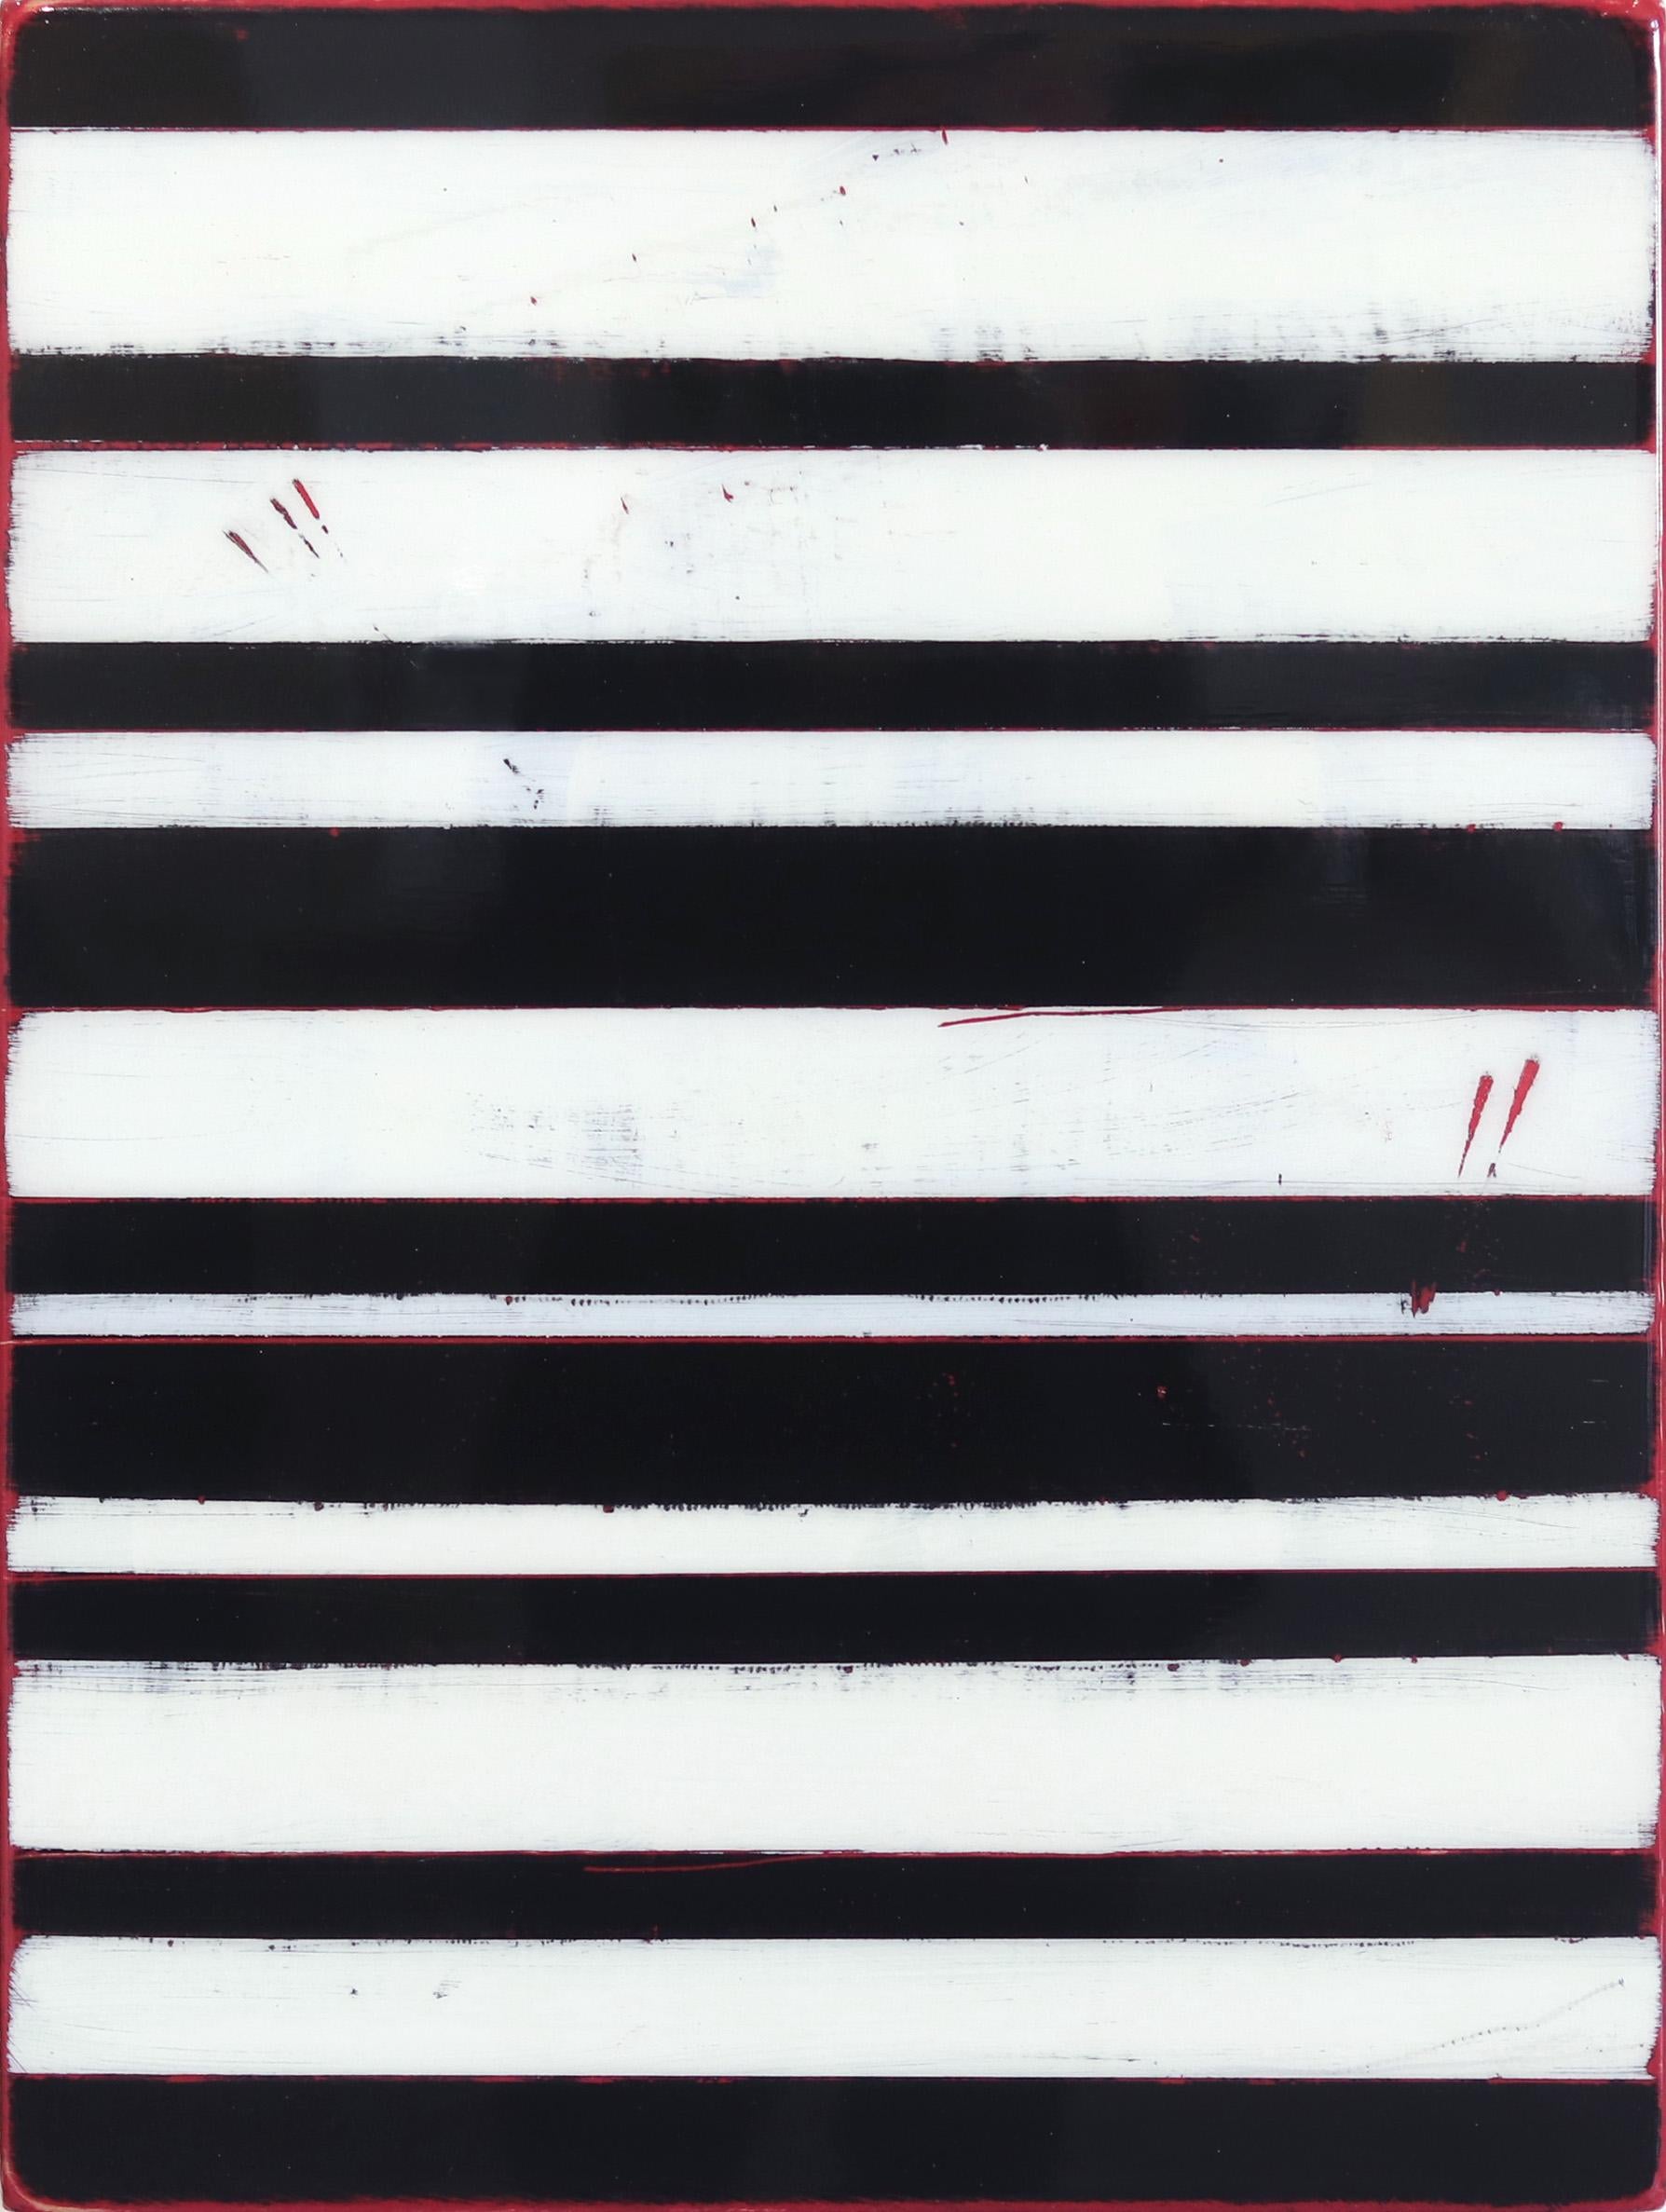 Vibration 3 - Monochromatic Striped Black and White Resin Artwork - Mixed Media Art by Ricky Hunt